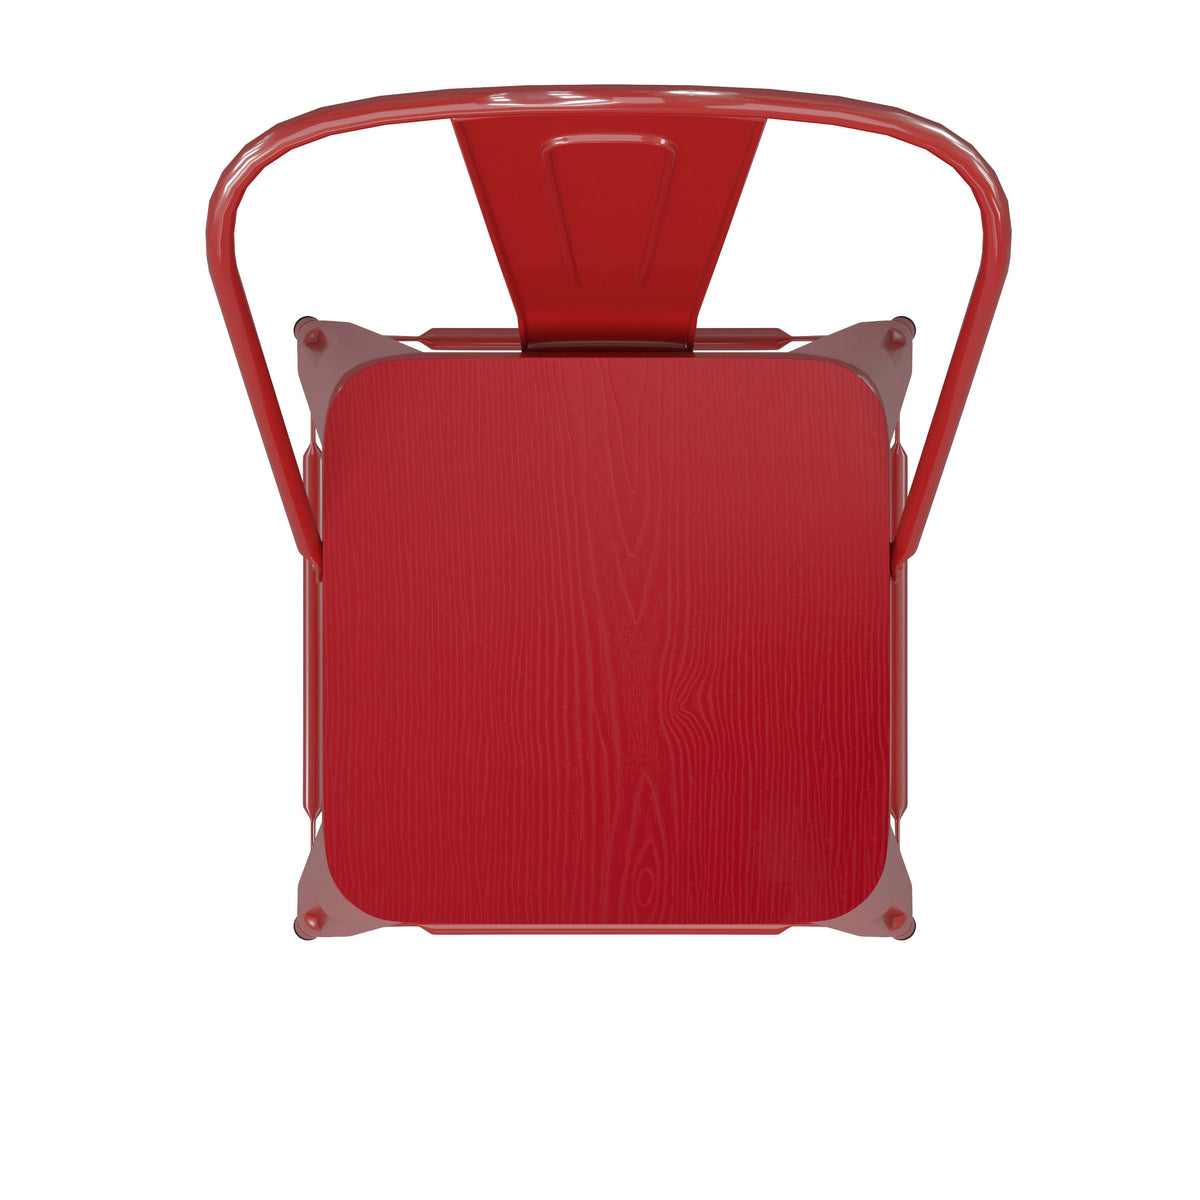 Red/Red |#| All-Weather Commercial Bar Stool with Removable Back/Poly Seat-Red/Red